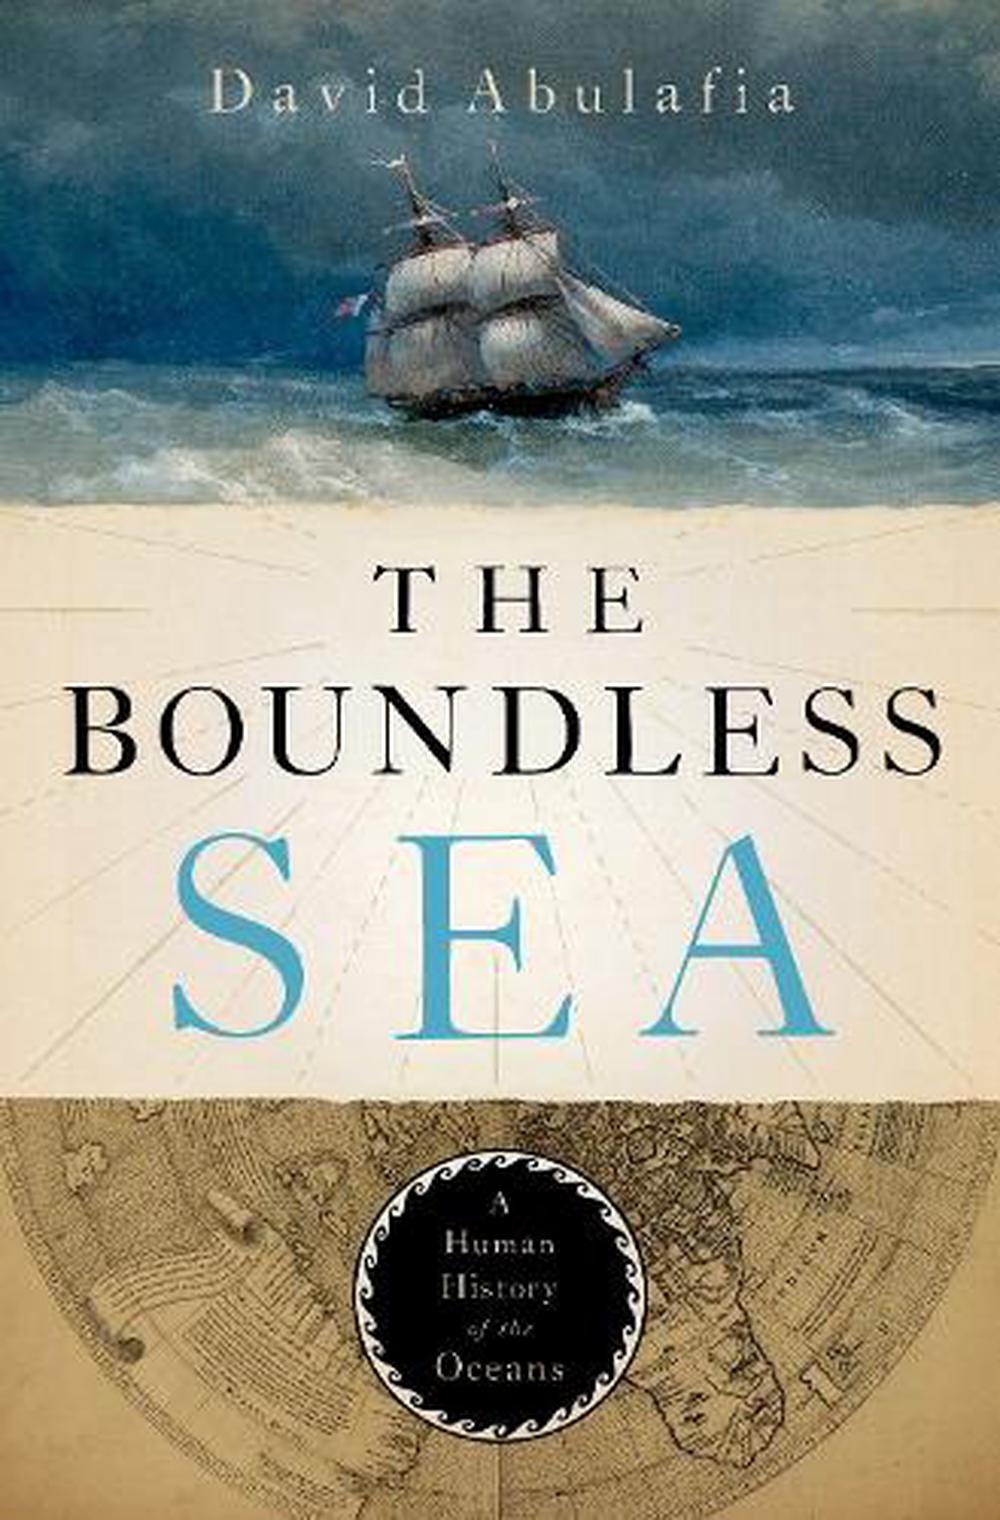 The　The　by　at　Hardcover,　David　Buy　online　9780199934980　Abulafia,　Sea　Boundless　Nile